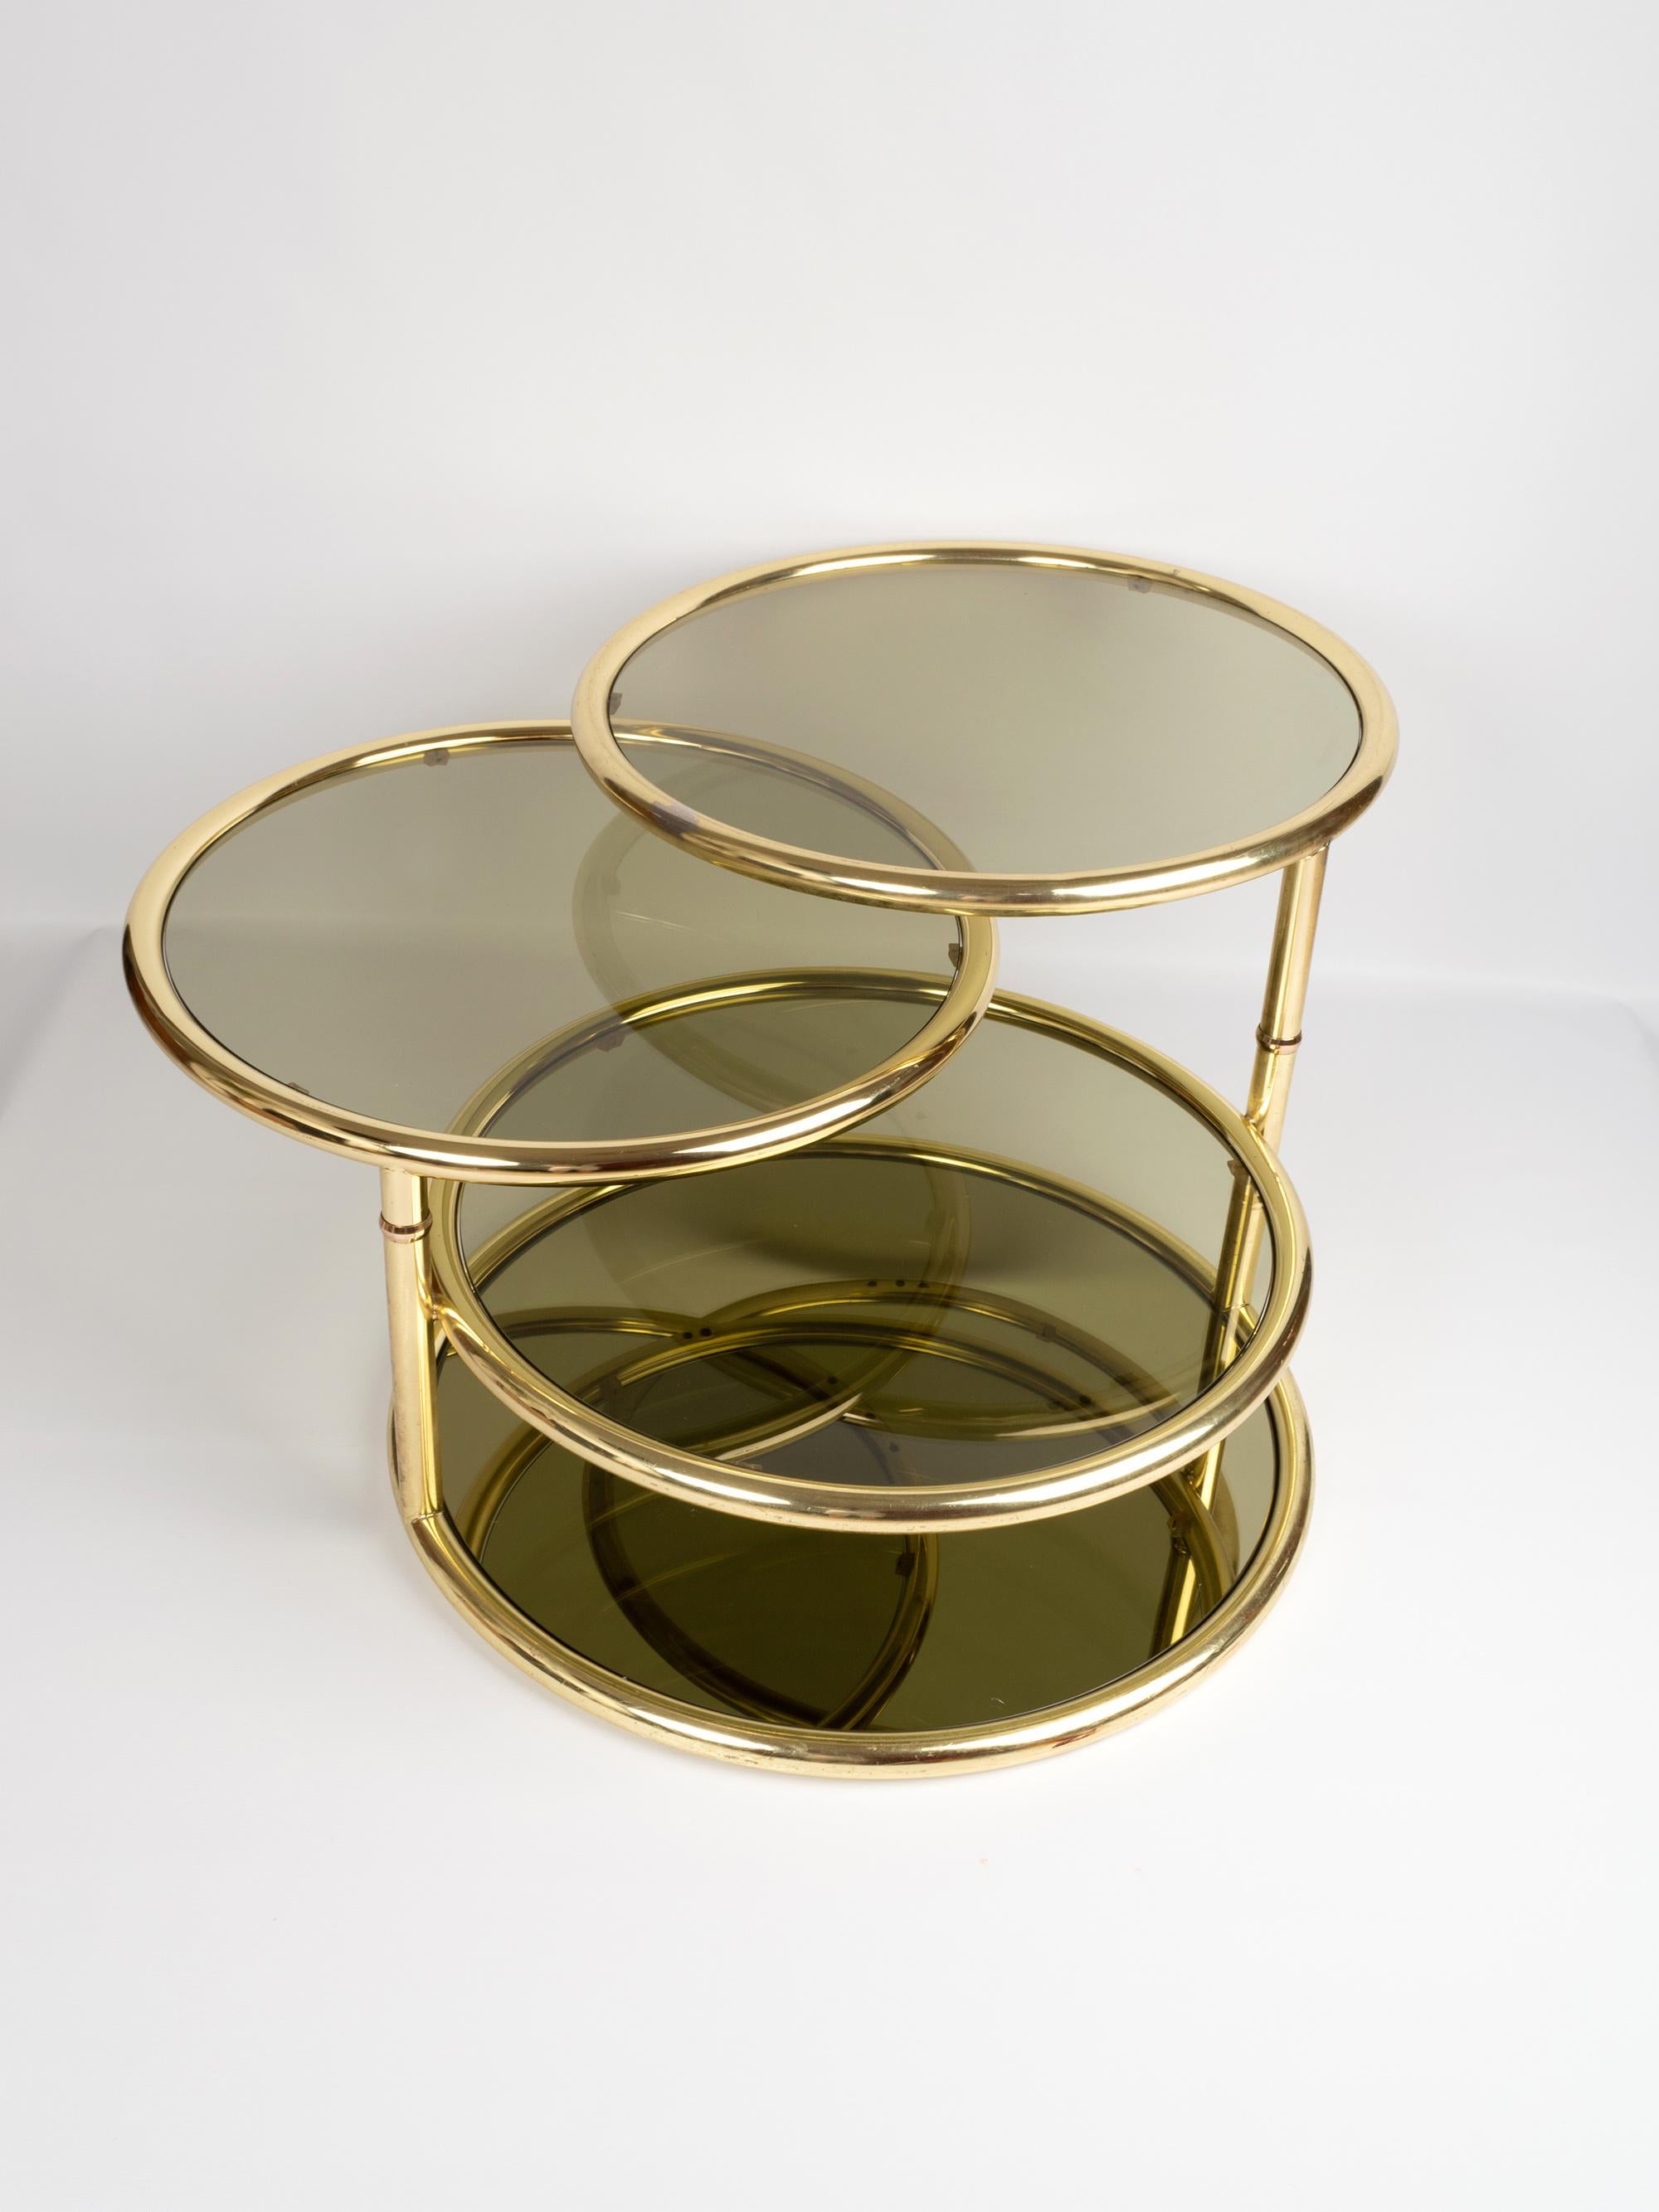 American Midcentury Circular Brass Swivel Tiered Coffee Cocktail Table, attributed to DIA For Sale